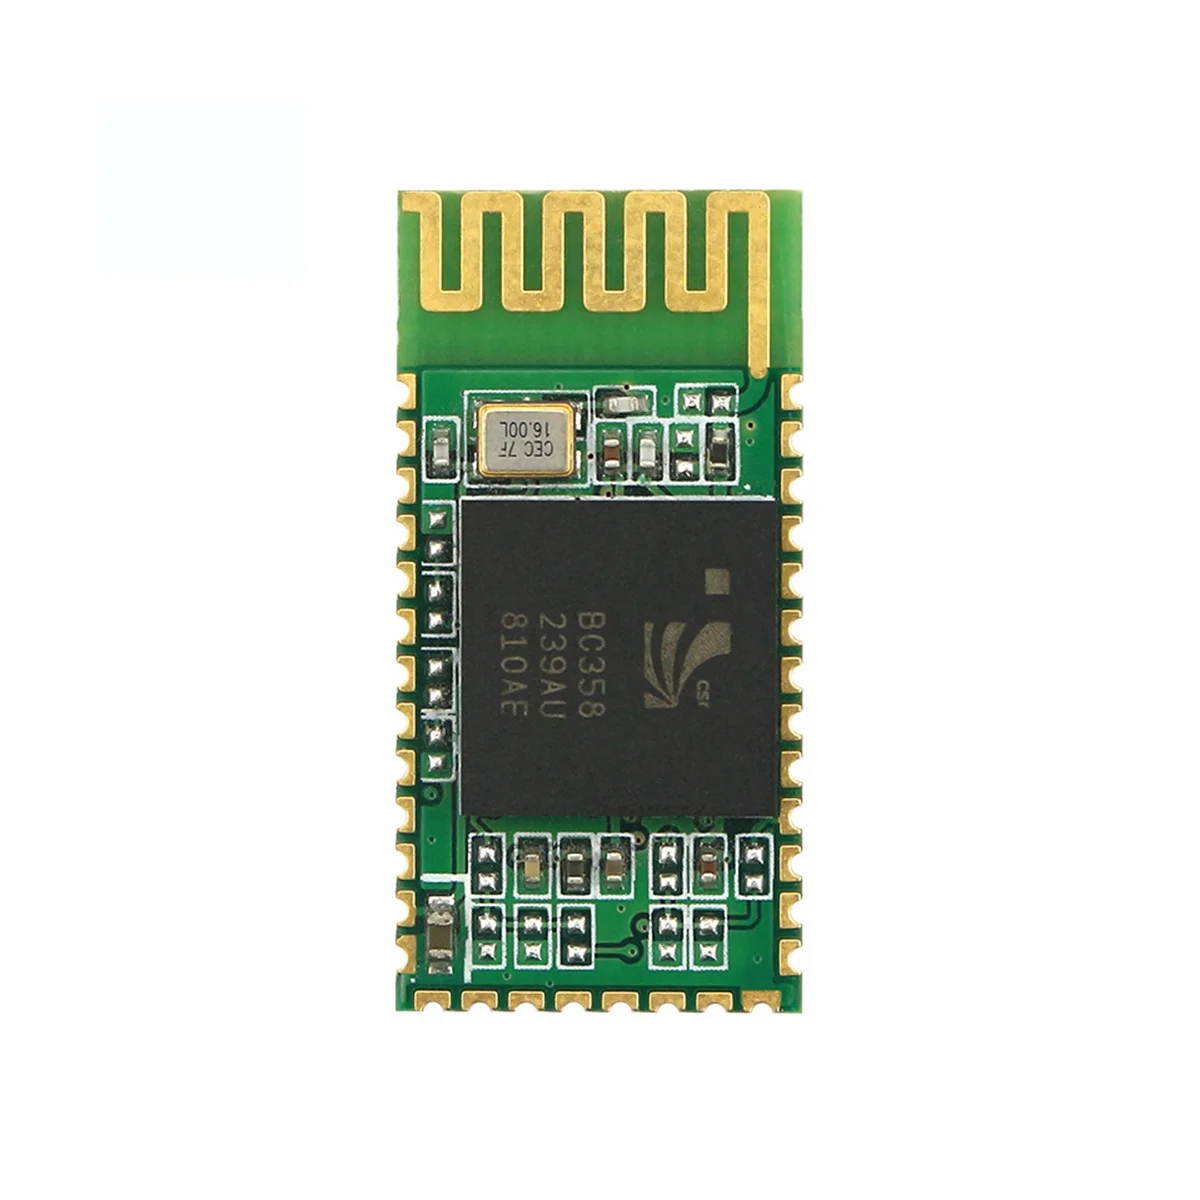 

Hc-06 Bluetooth Serial Module Connected to 51 Microcontroller Csr Wireless Transmission Module